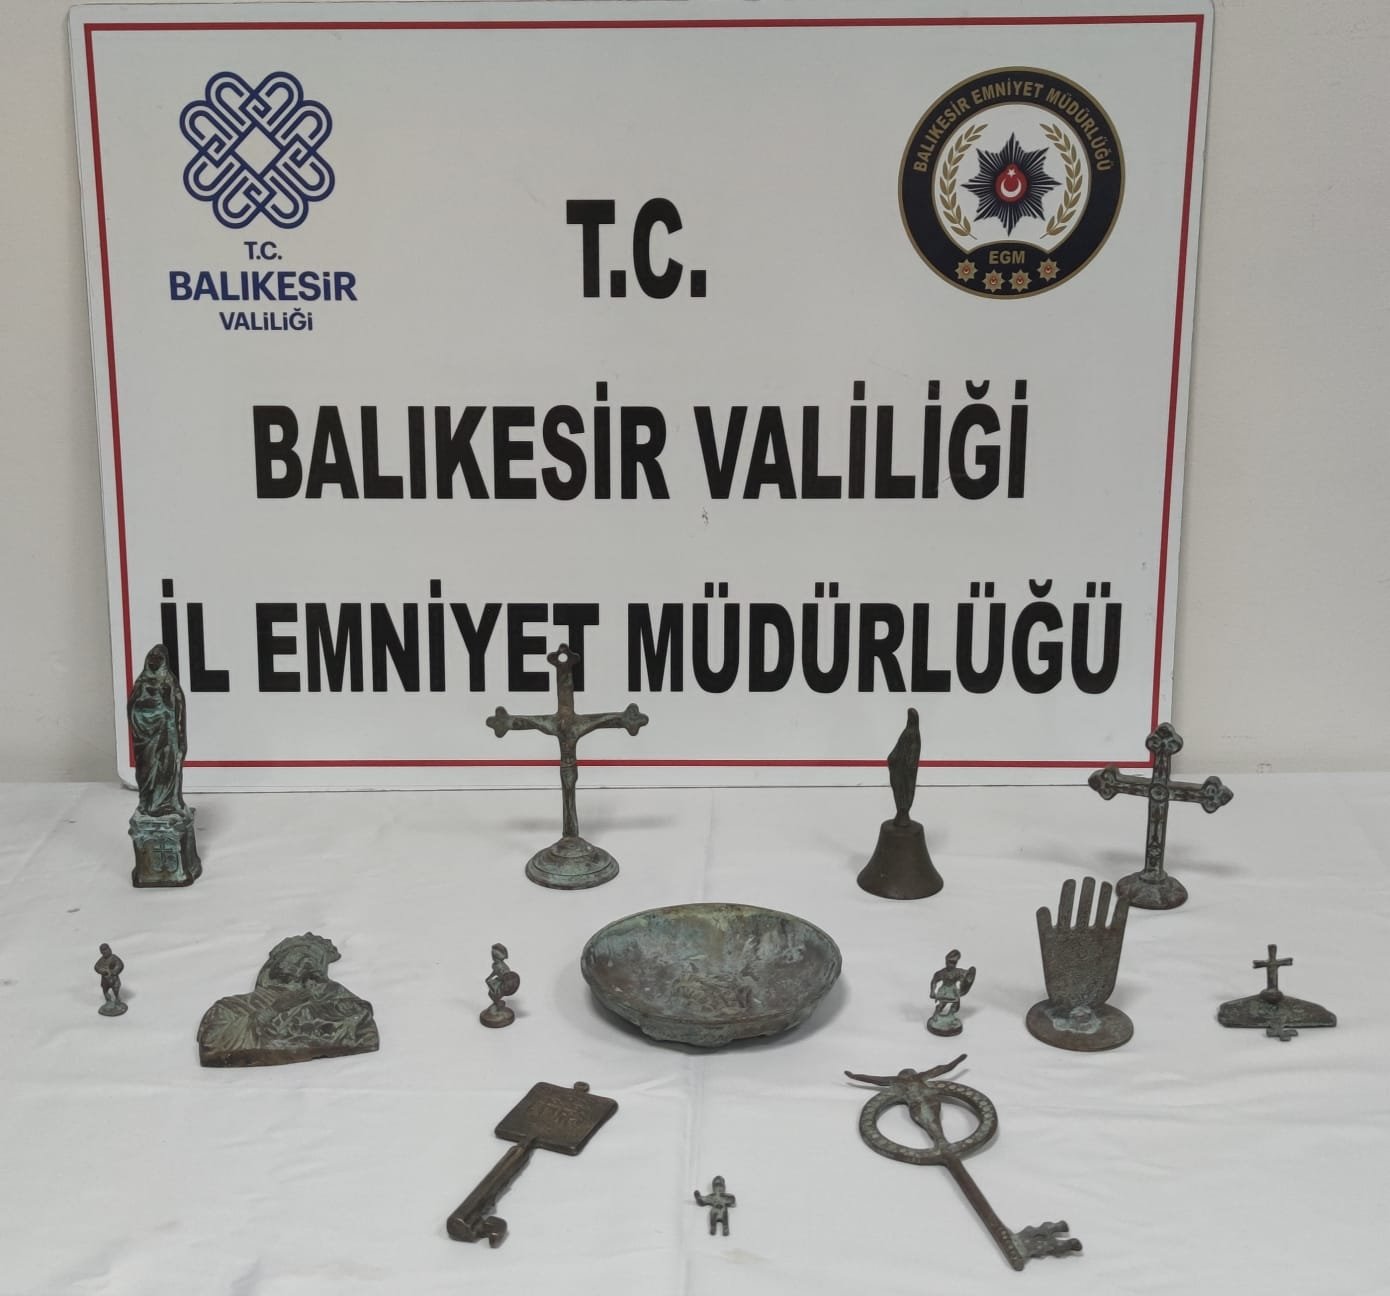 Artifacts seized by Balıkesir police are seen on display in this photo taken on Jan. 8, 2021 (AA Photo)